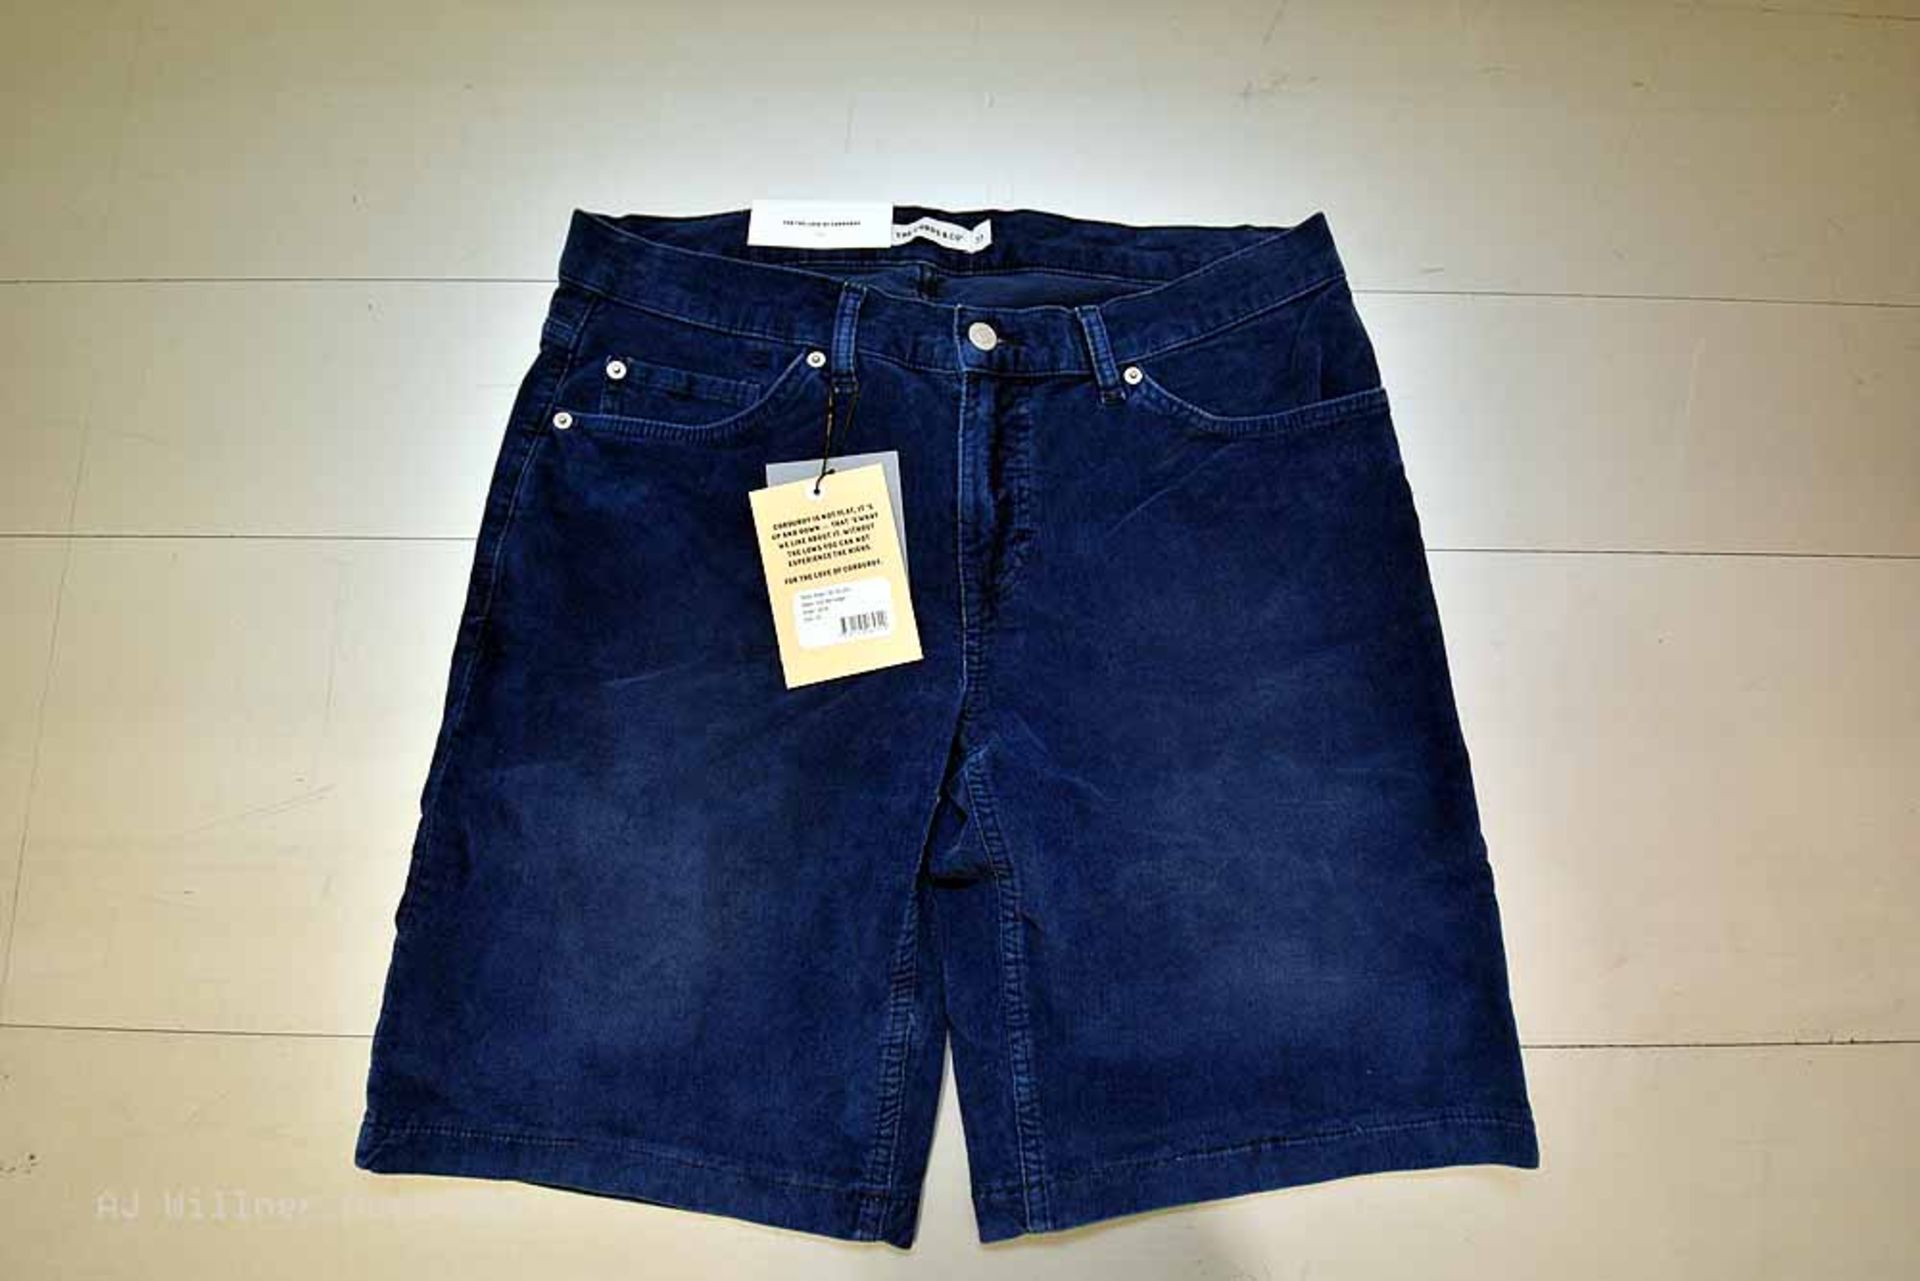 The Cords & Co. "Adam" Style, Men's 5-Pocket Mid-Waist/Classic Fit Shorts,Azure/Silver/Turq/Indigo - Image 3 of 10